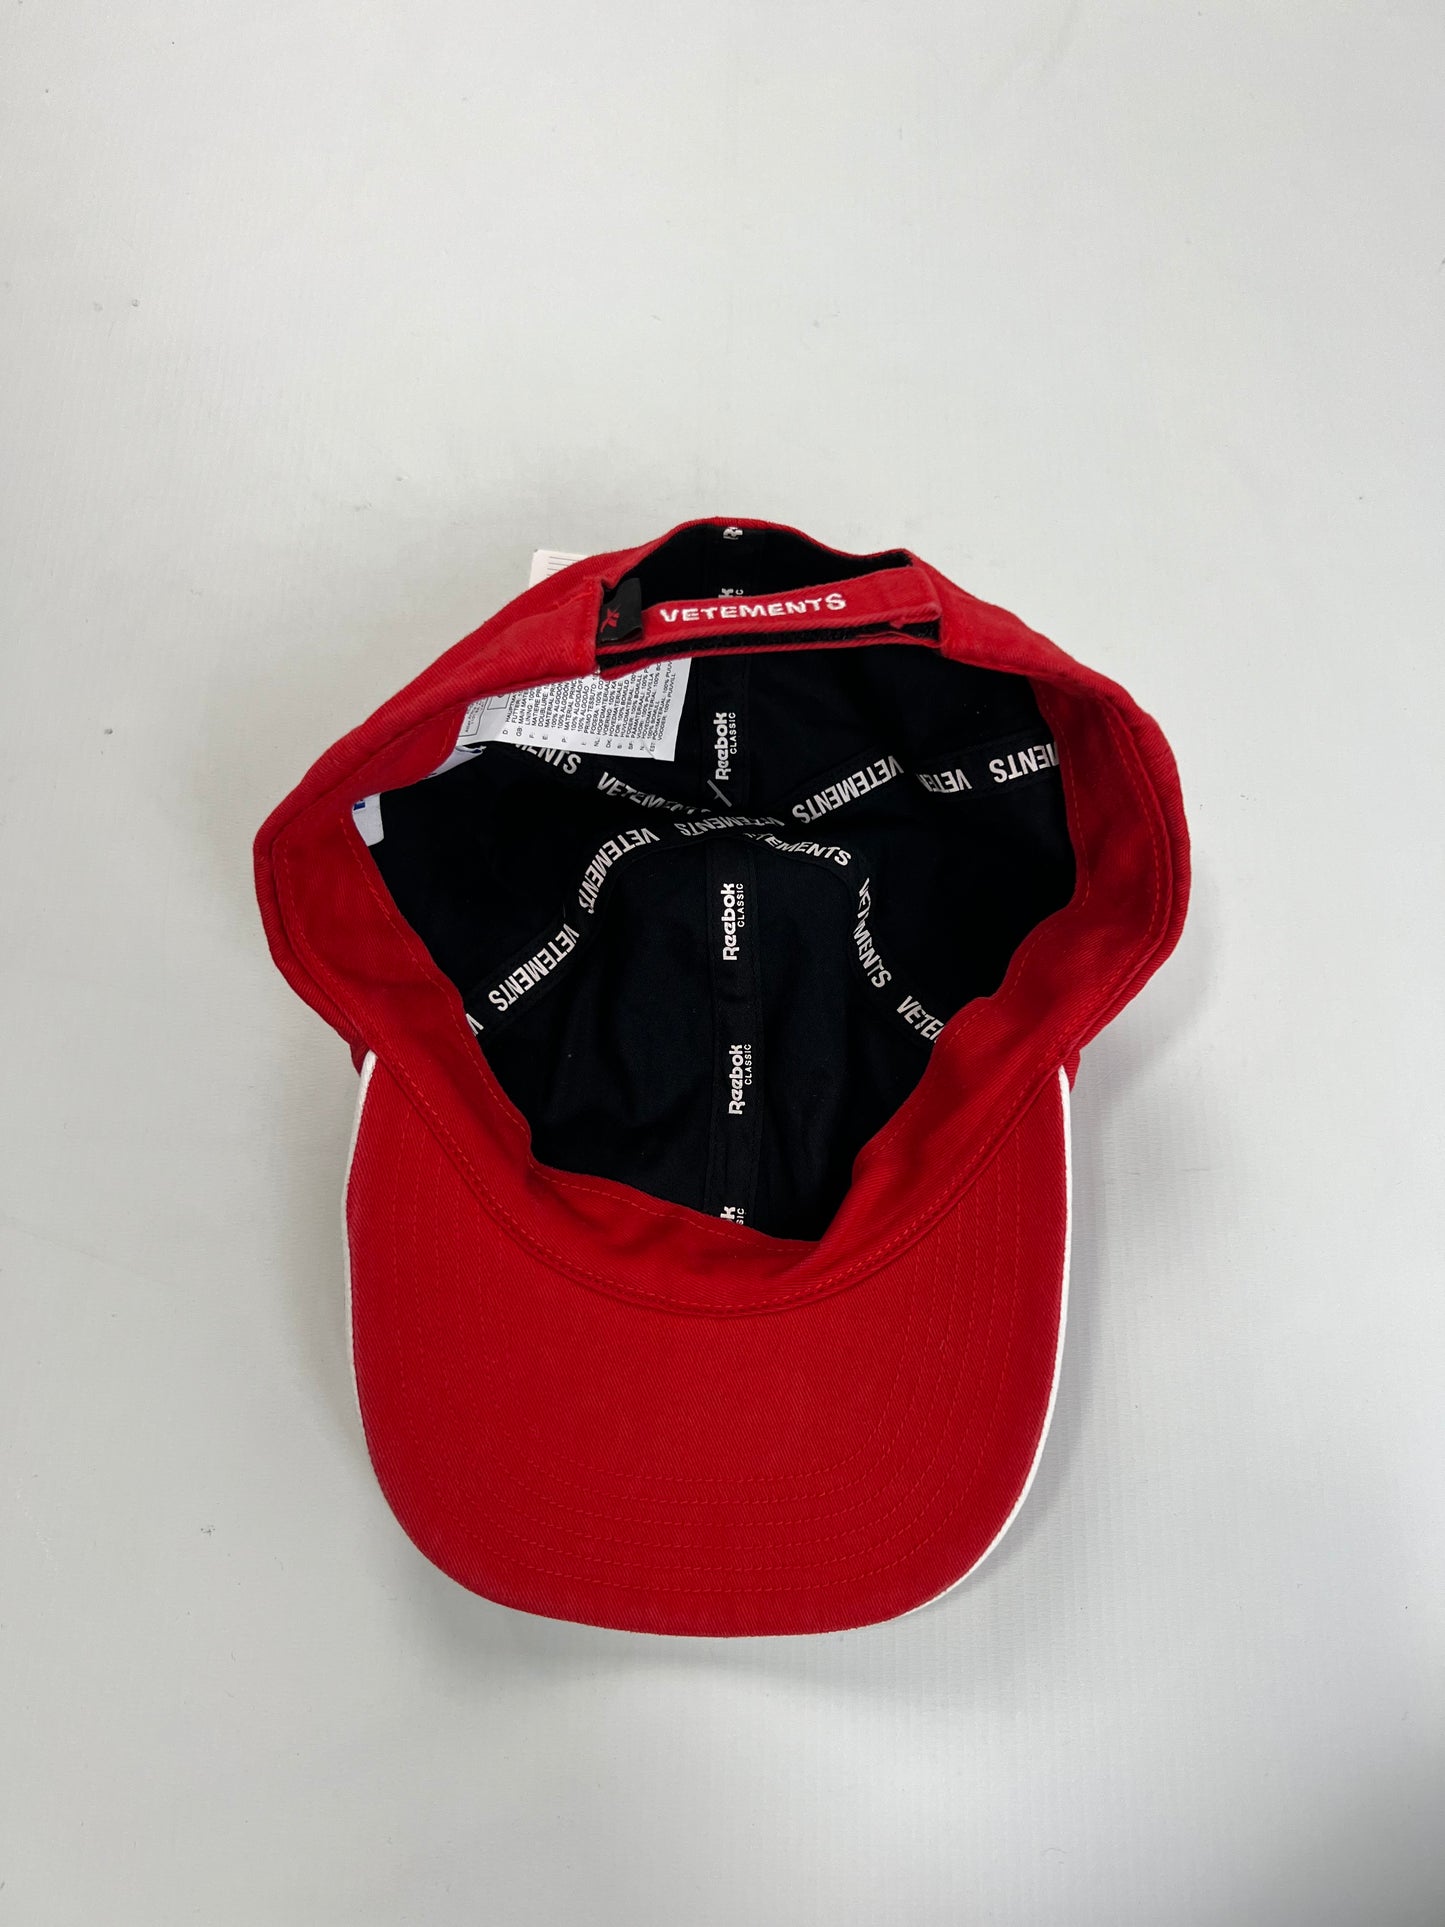 Vetements x Rebook AW18 runway Morocco flame hat red SZ:OS